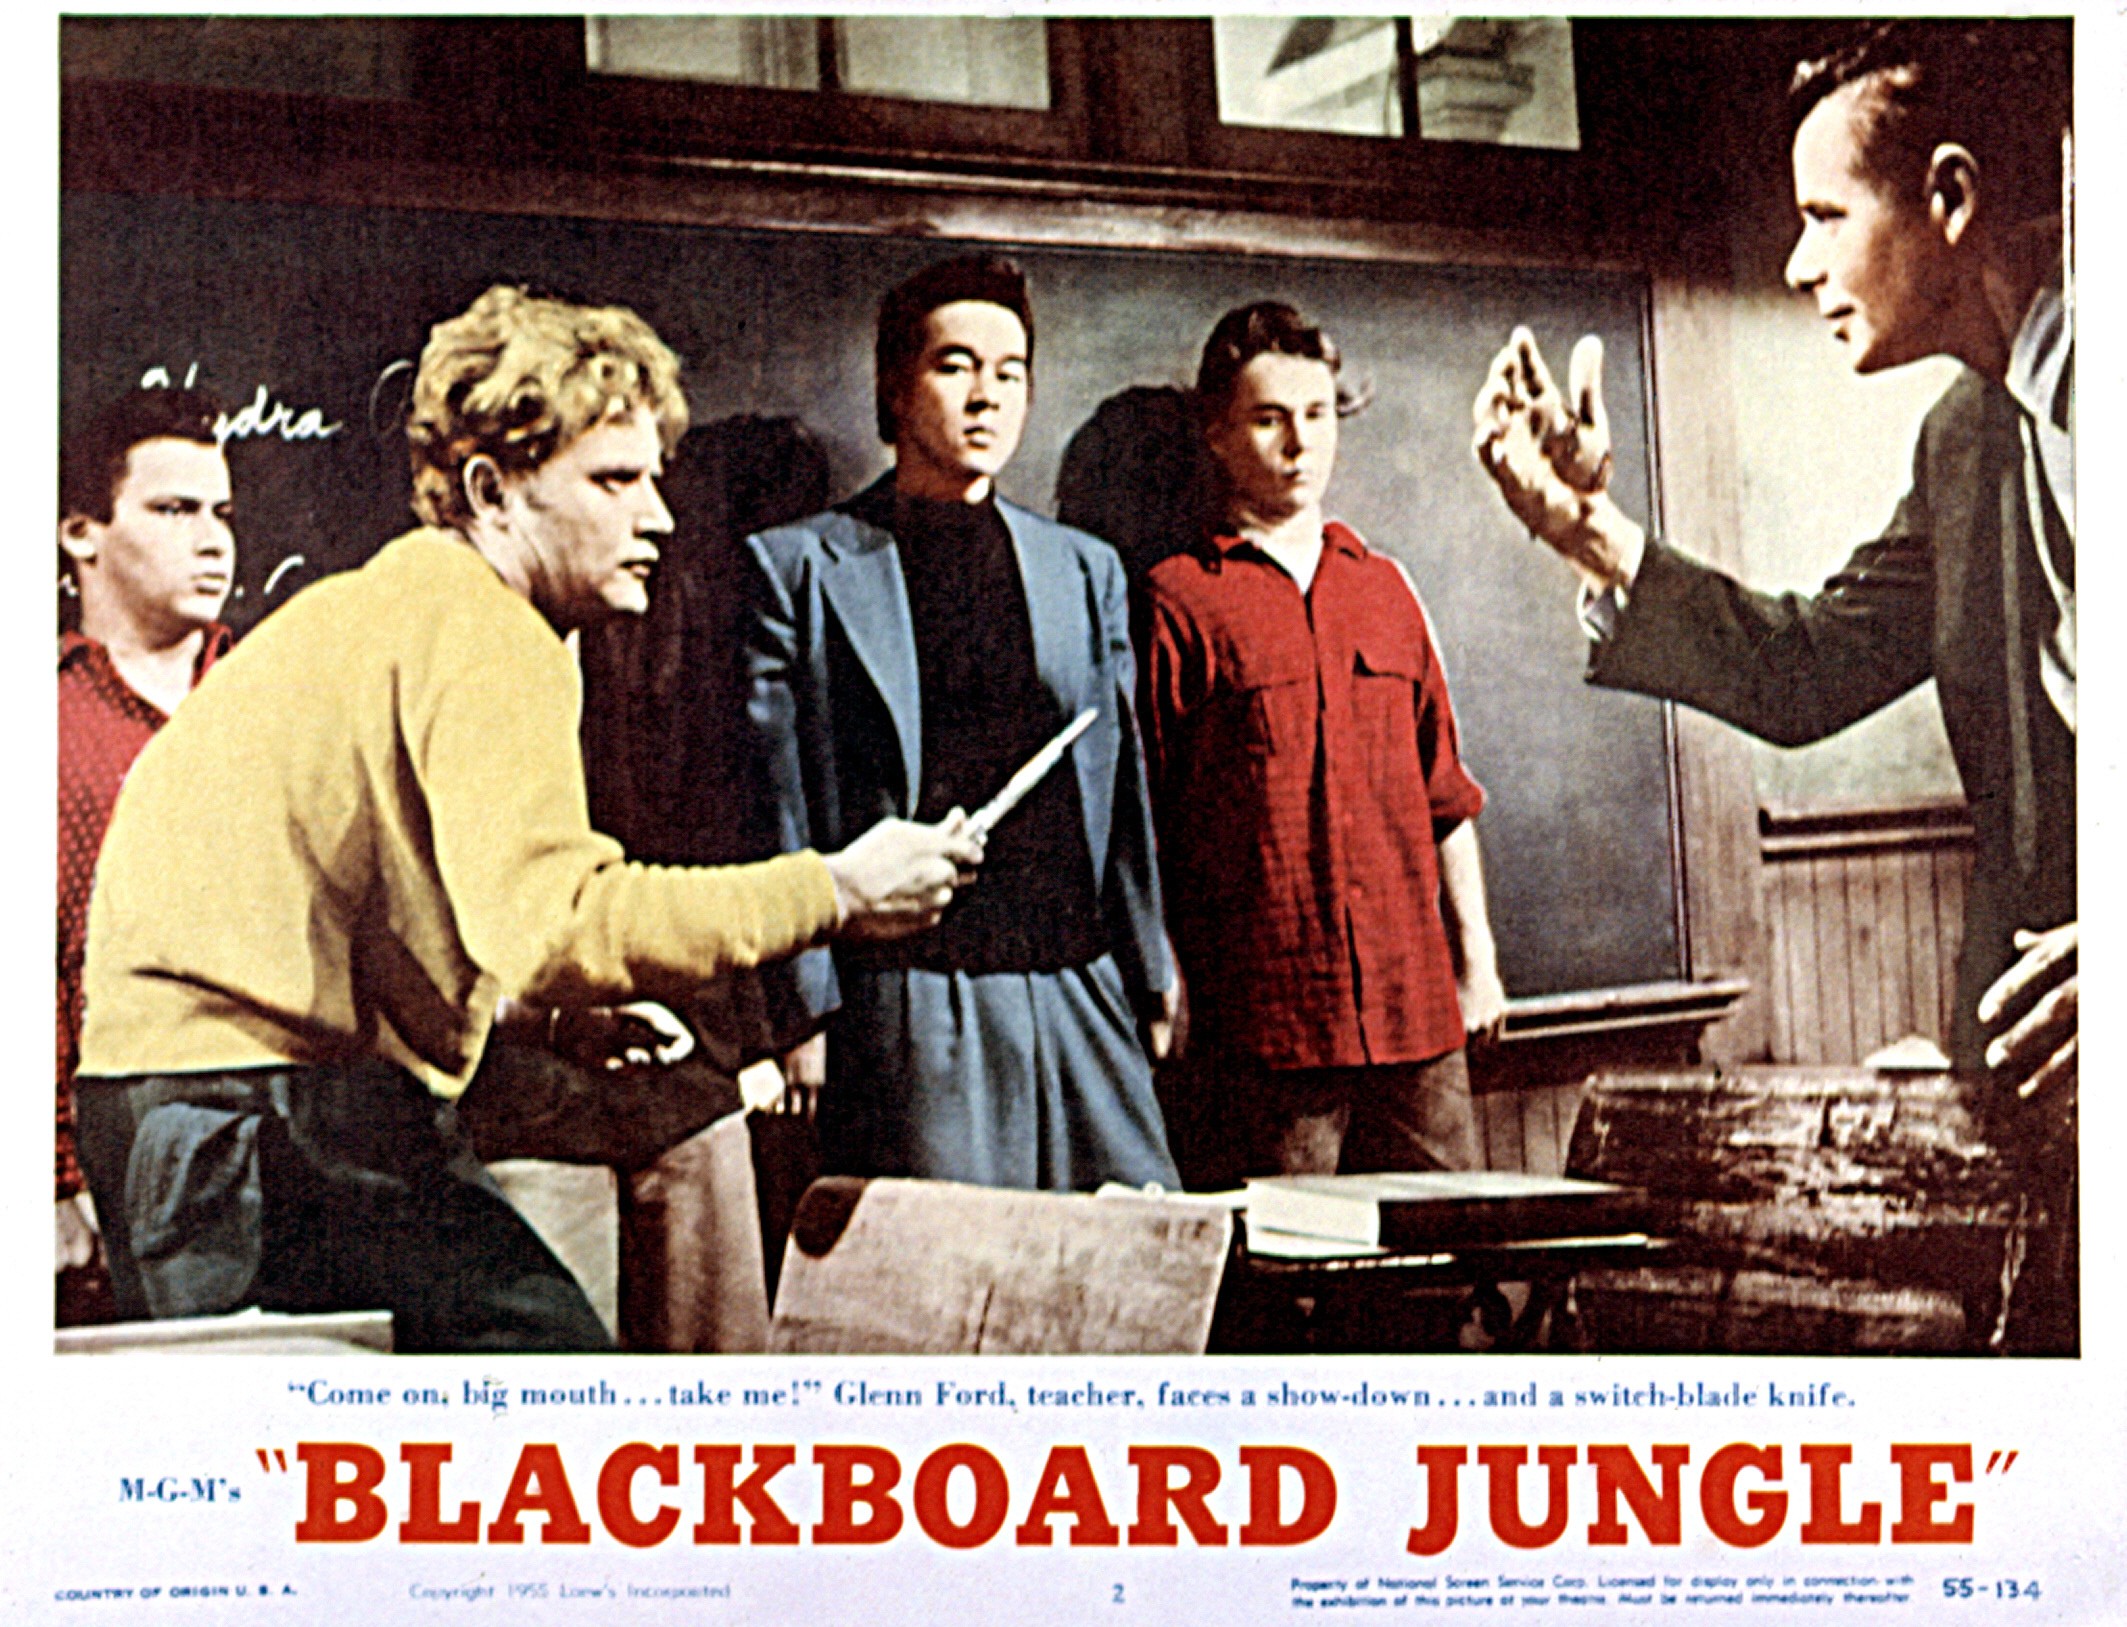 A still from the movie Blackboard Jungle where a student is menacing at a teacher